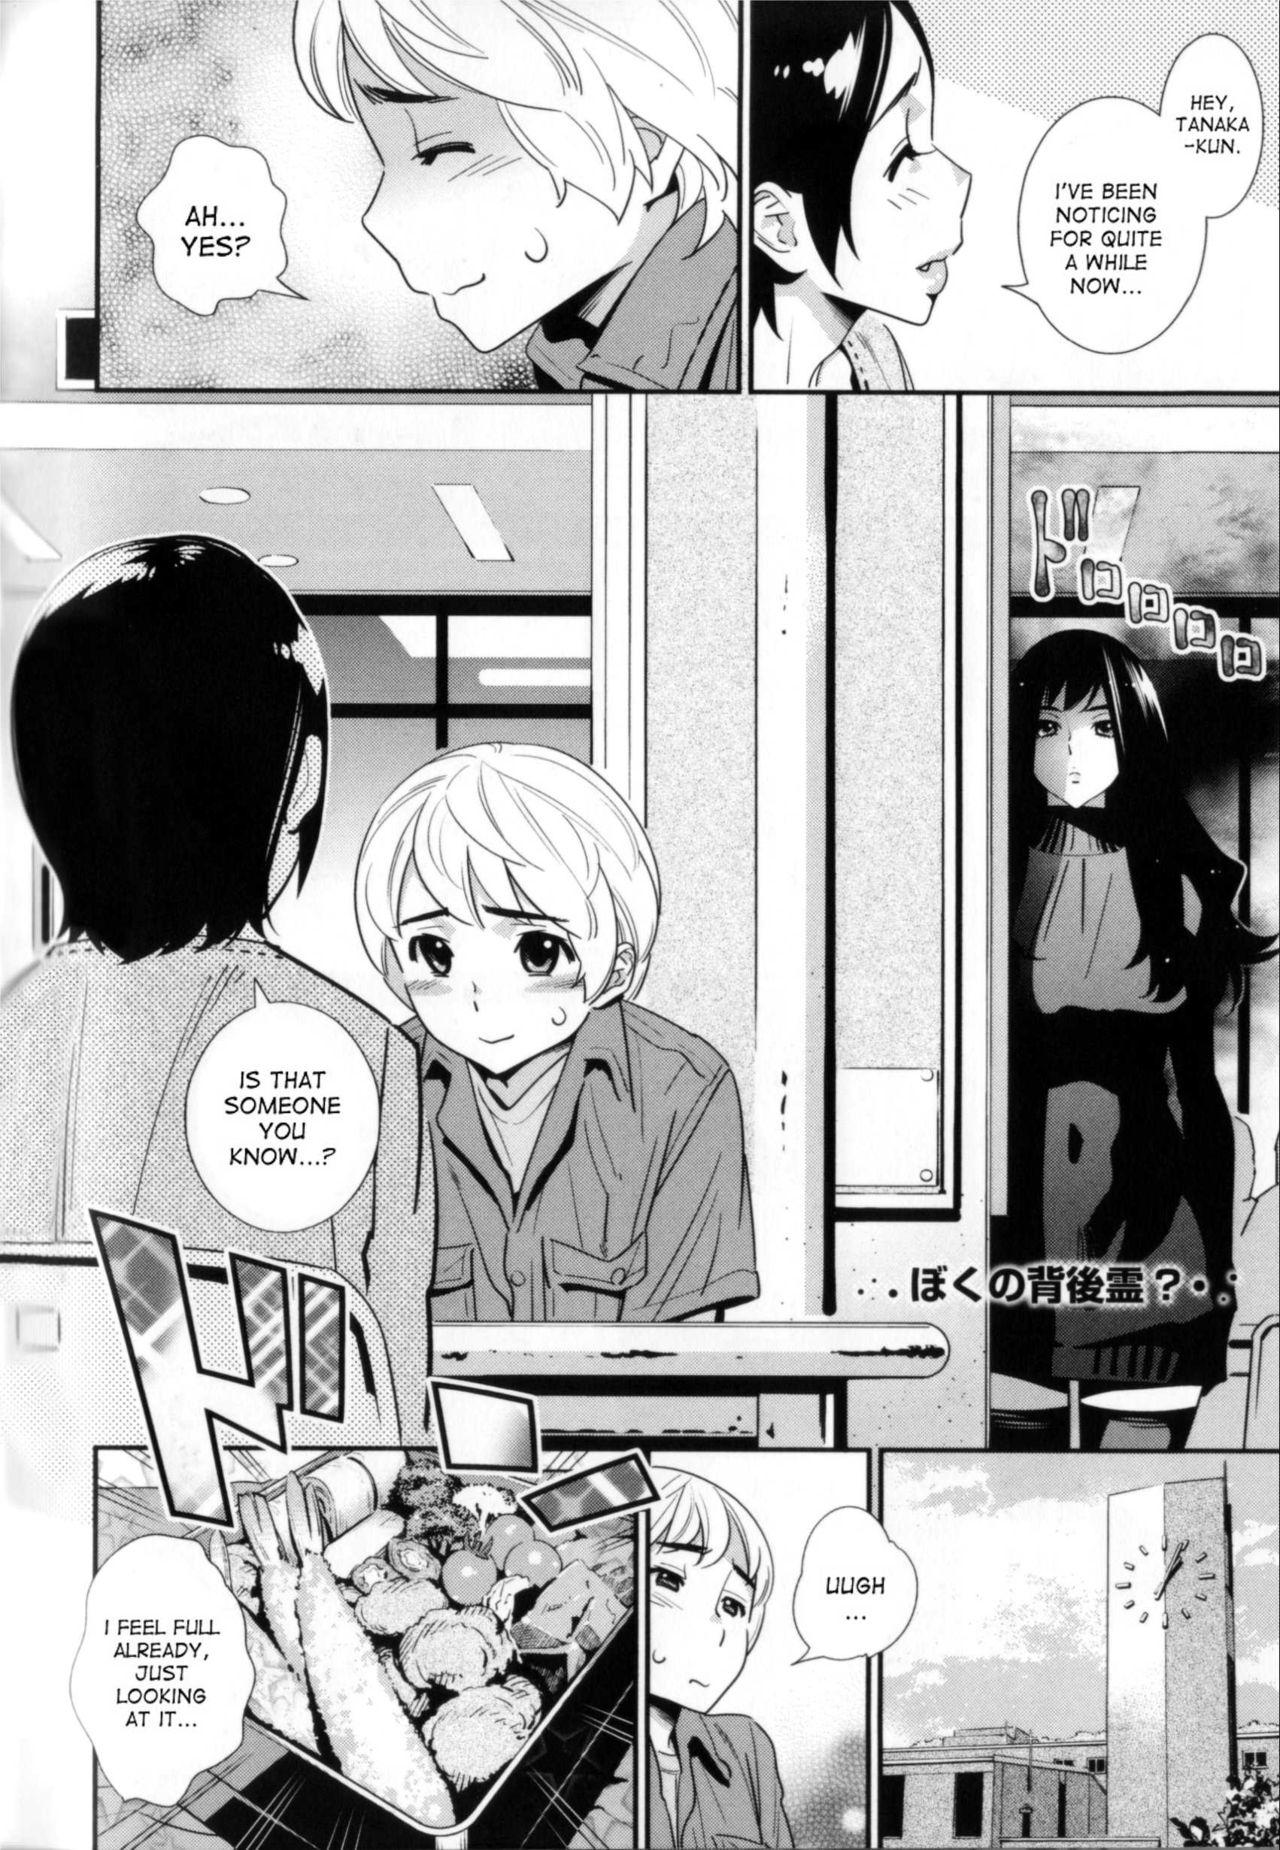 Milfsex Boku no Haigorei? | The Ghost Behind My Back? Unshaved - Page 2